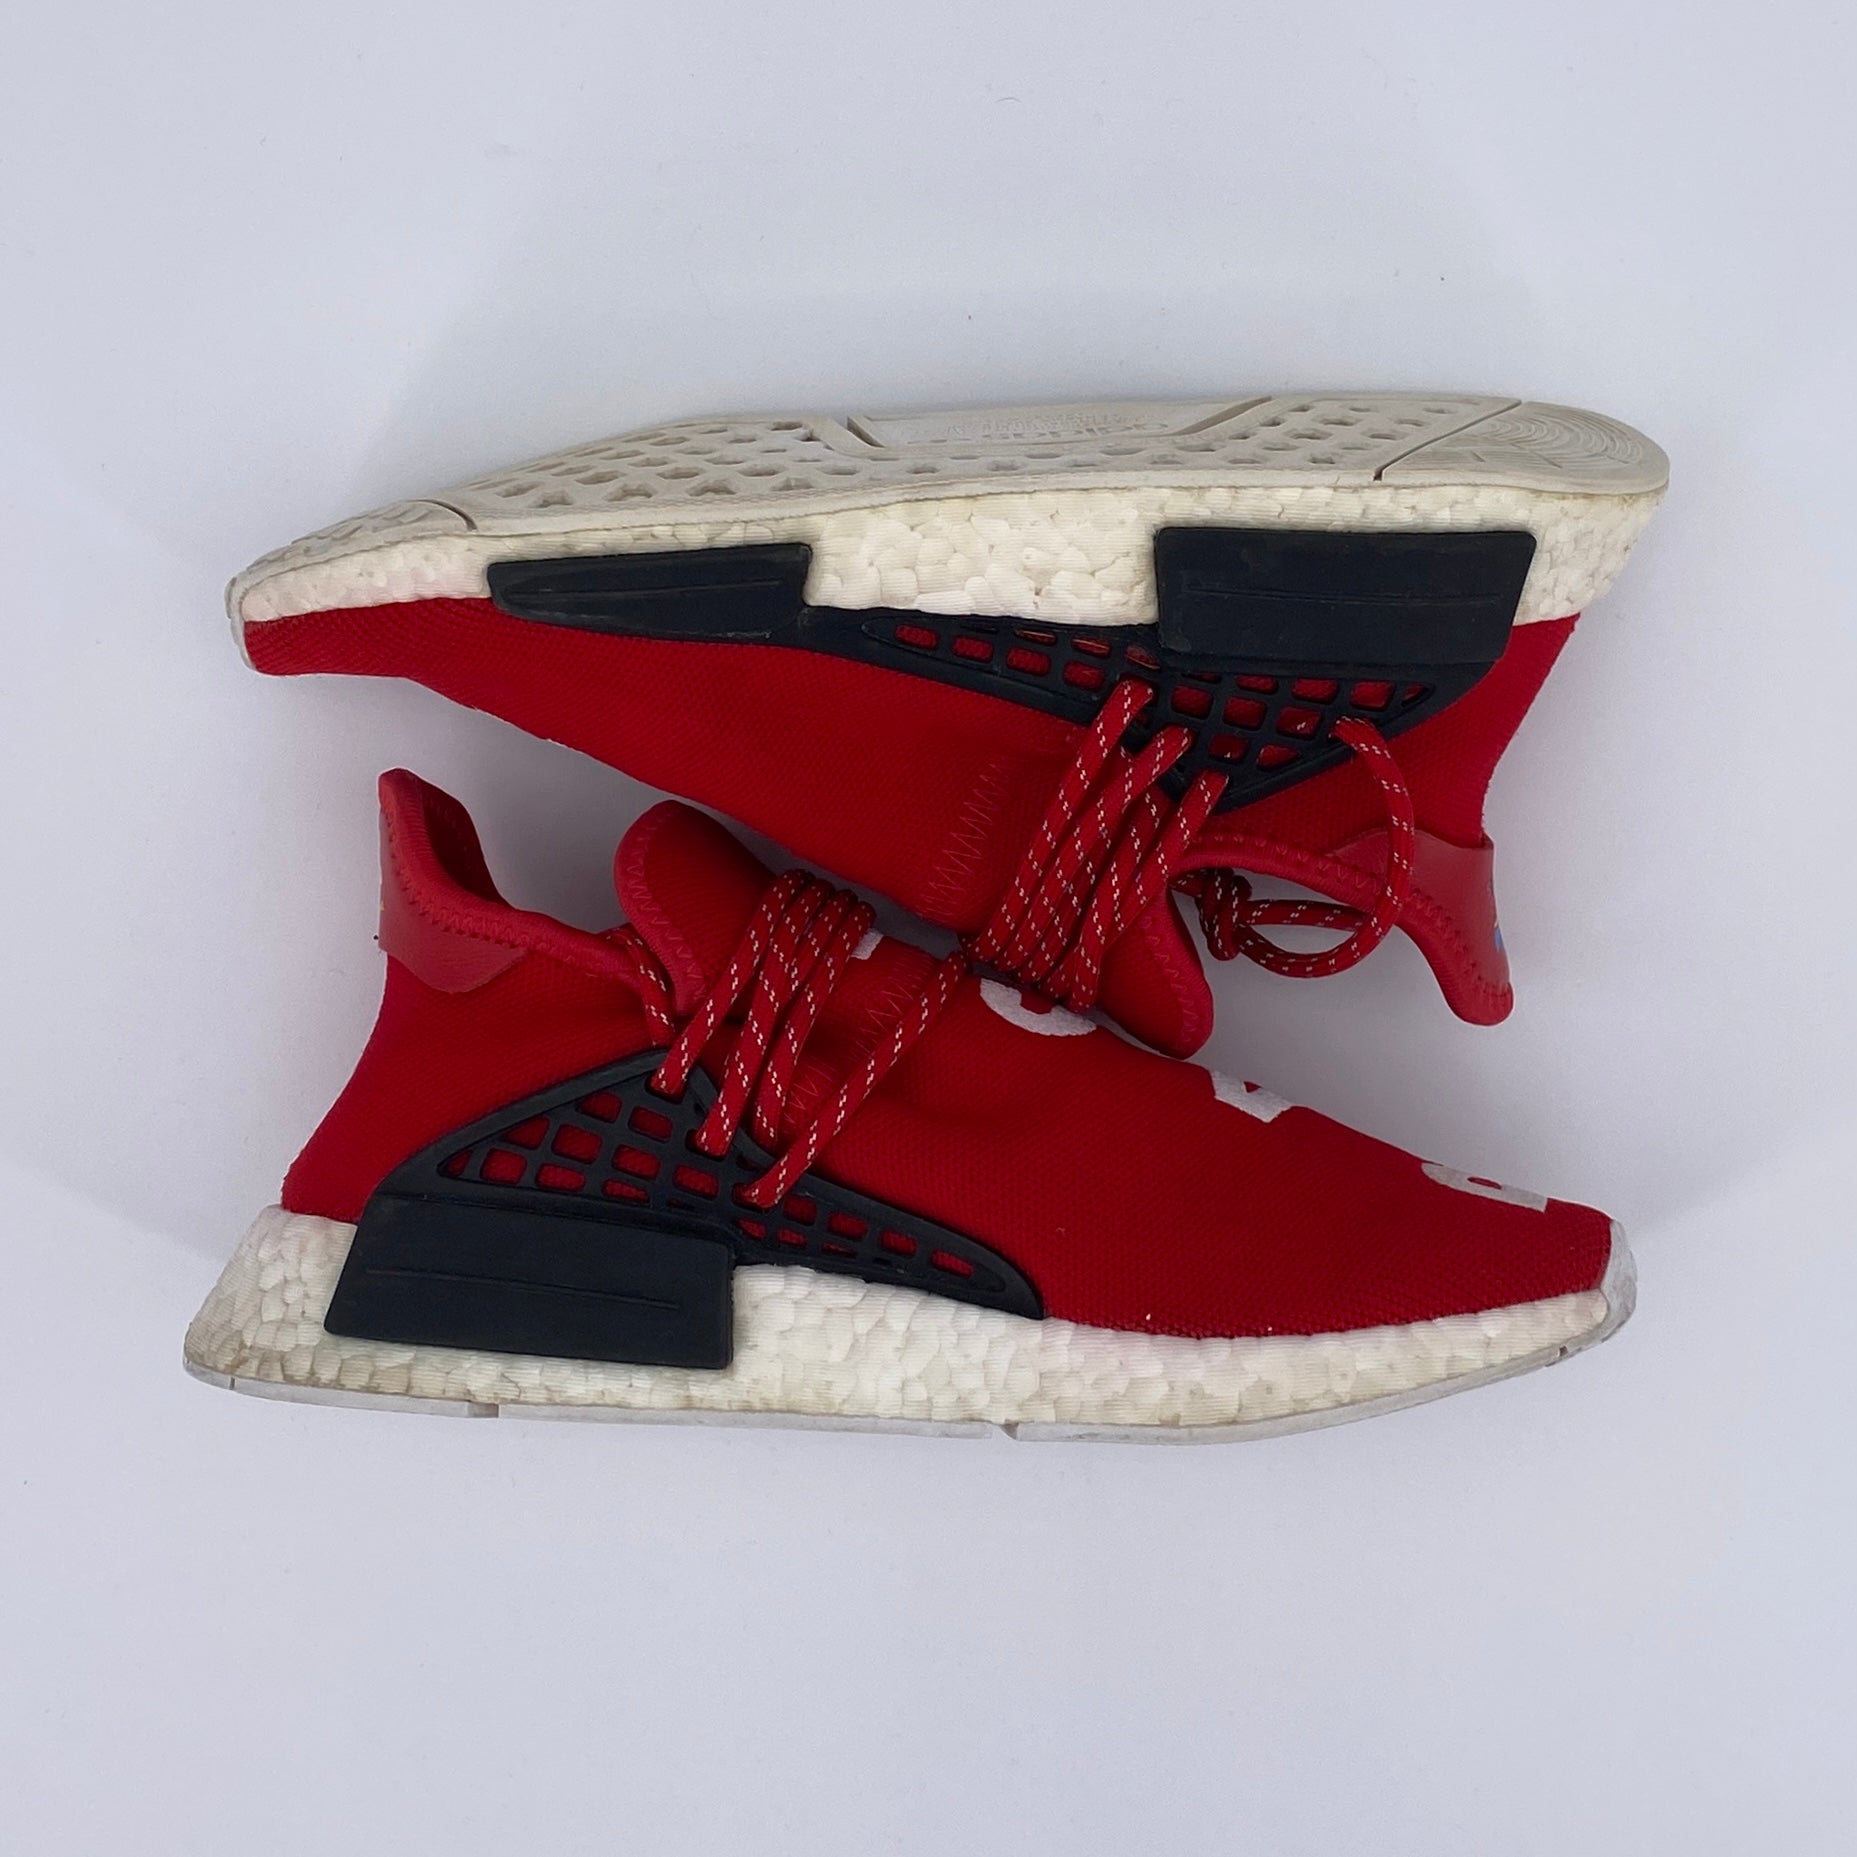 Adidas PW Human Race NMD "Scarlet" 2016 Used Size 6